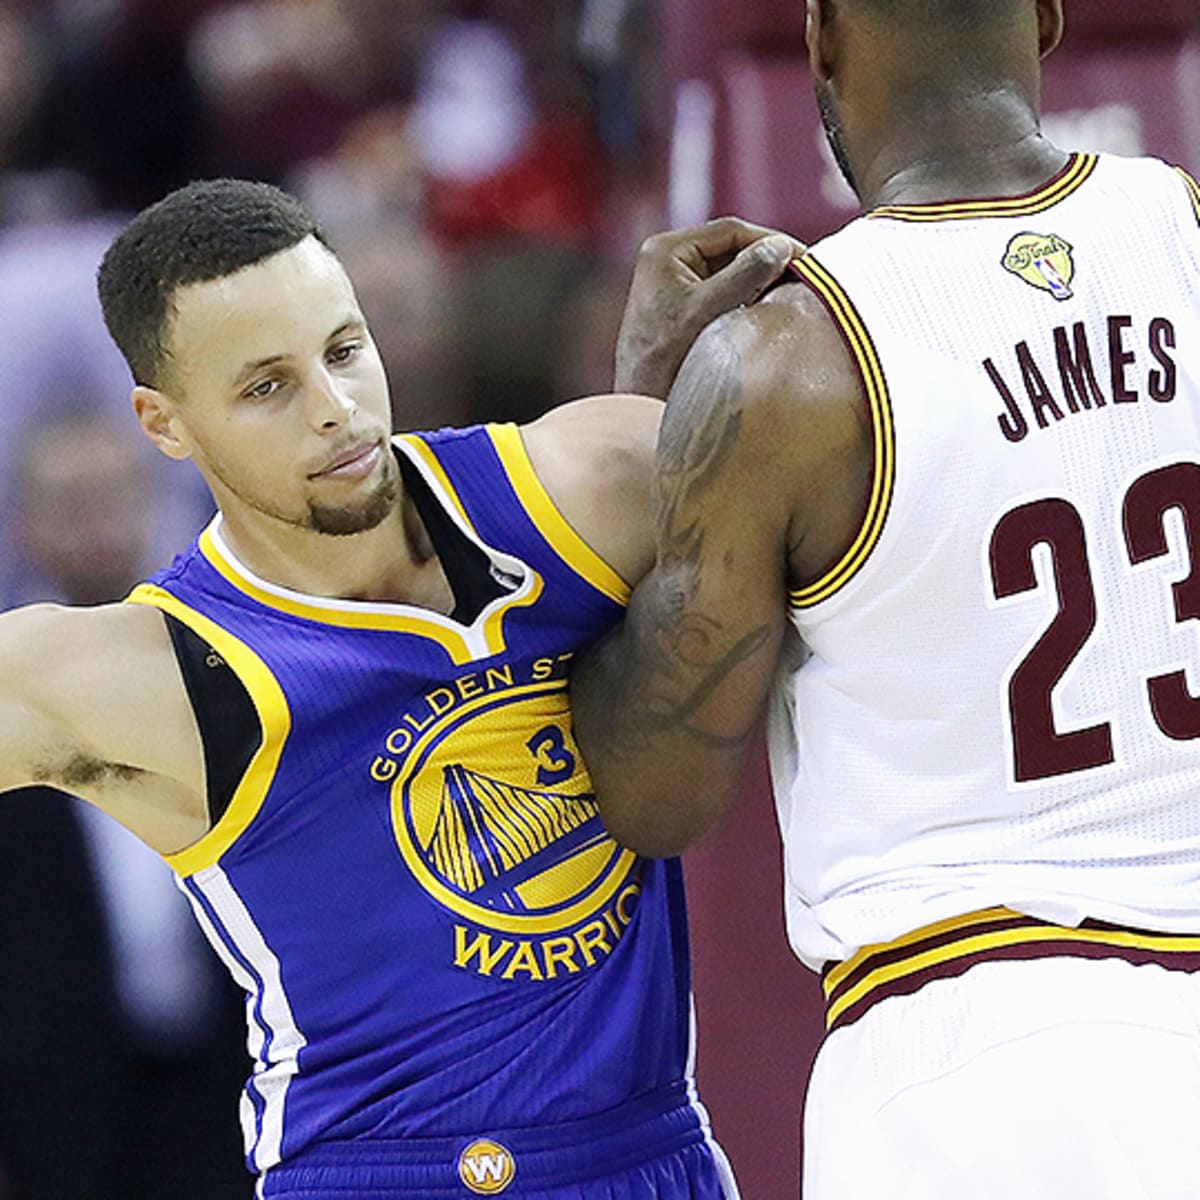 LeBron vs. Steph Curry: Who has the most valuable game-worn jersey